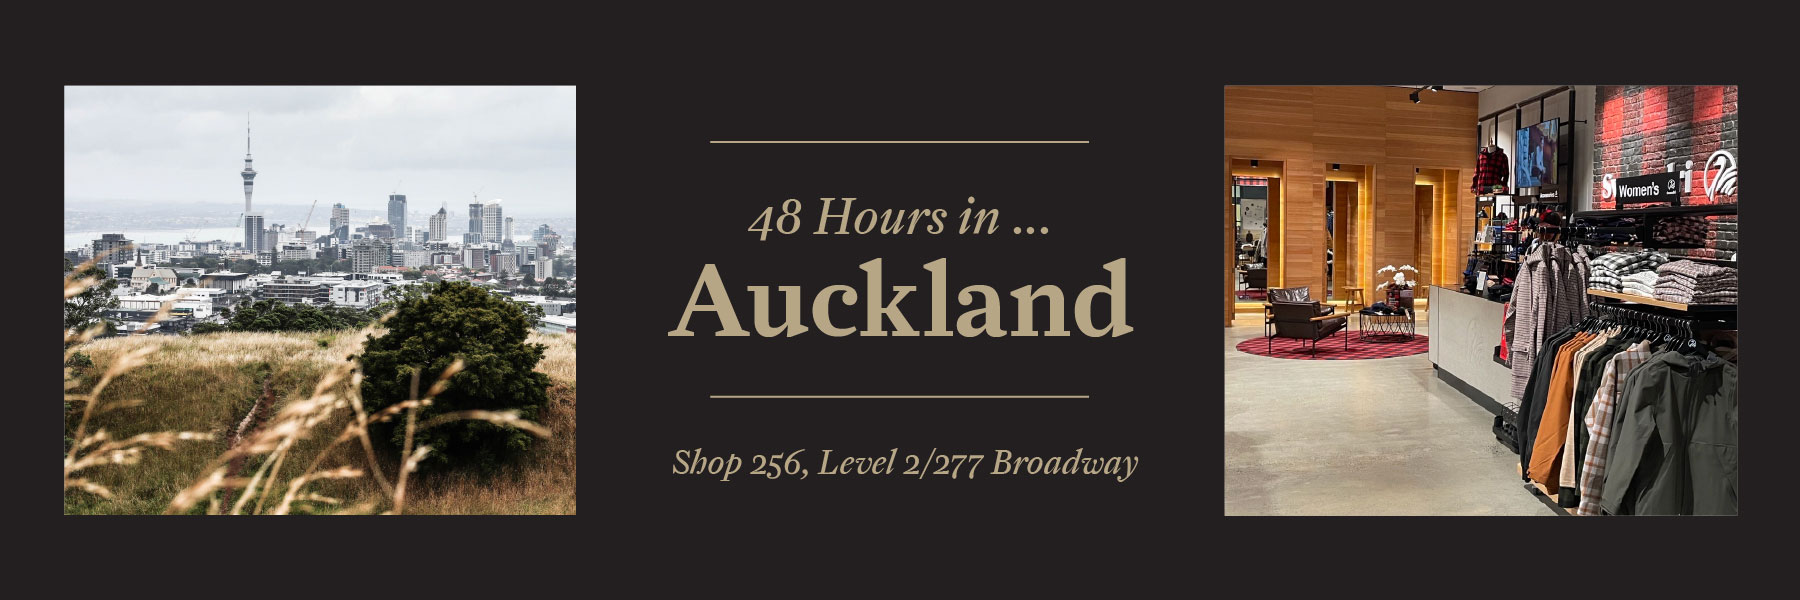 48 hours in Auckland